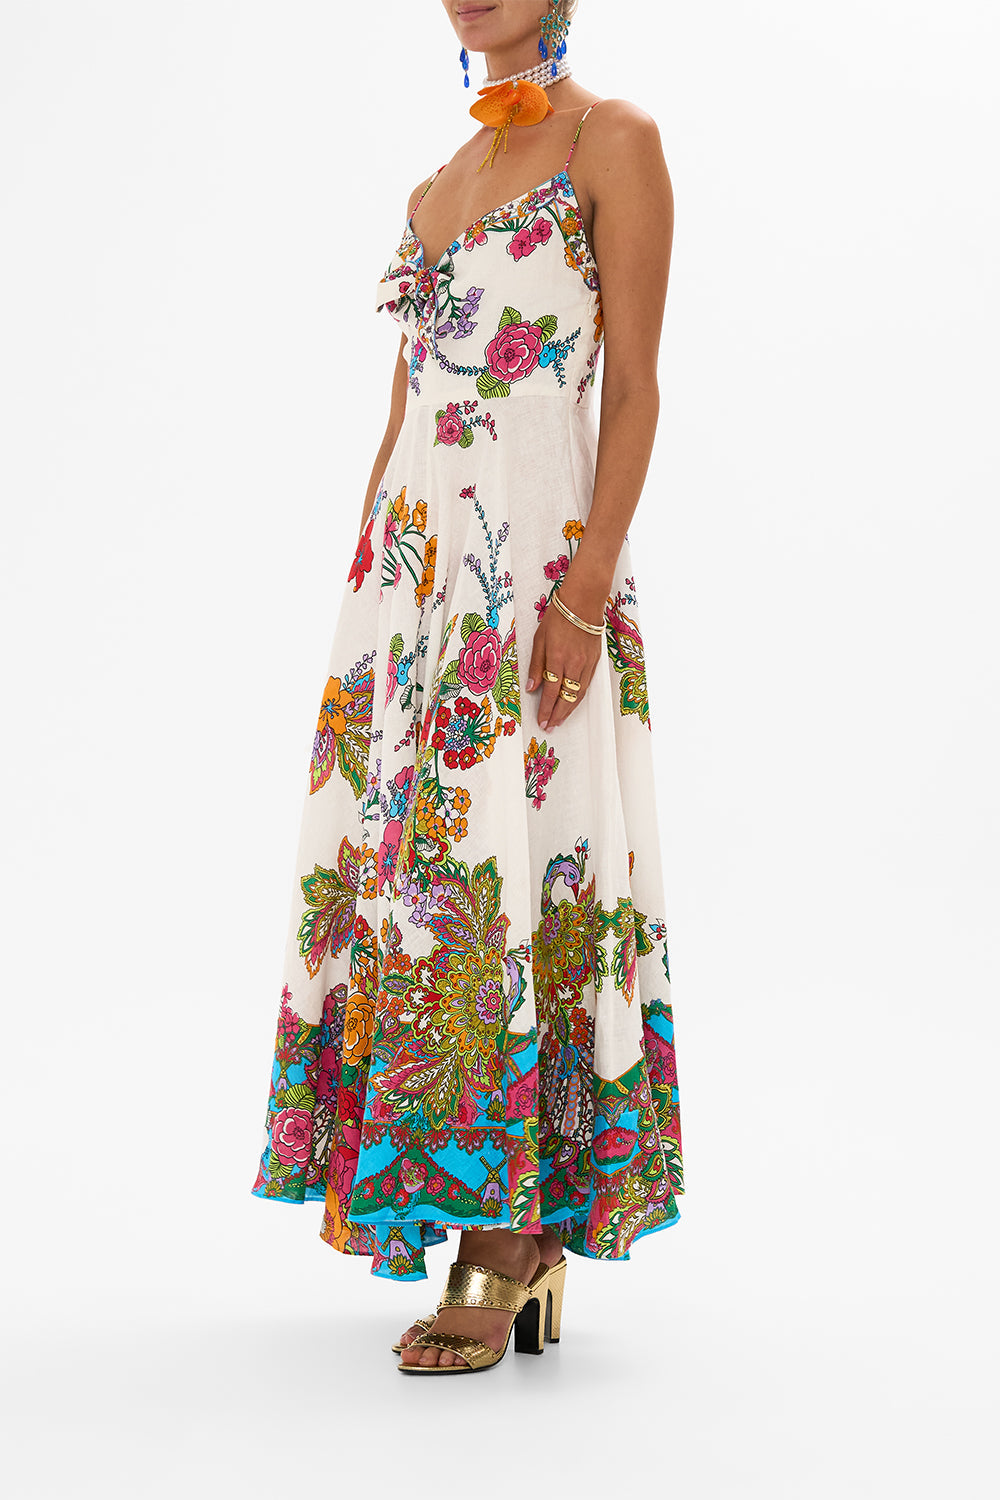 CAMILLA retro floral long dress with tie-front in Cosmic Prairie print.